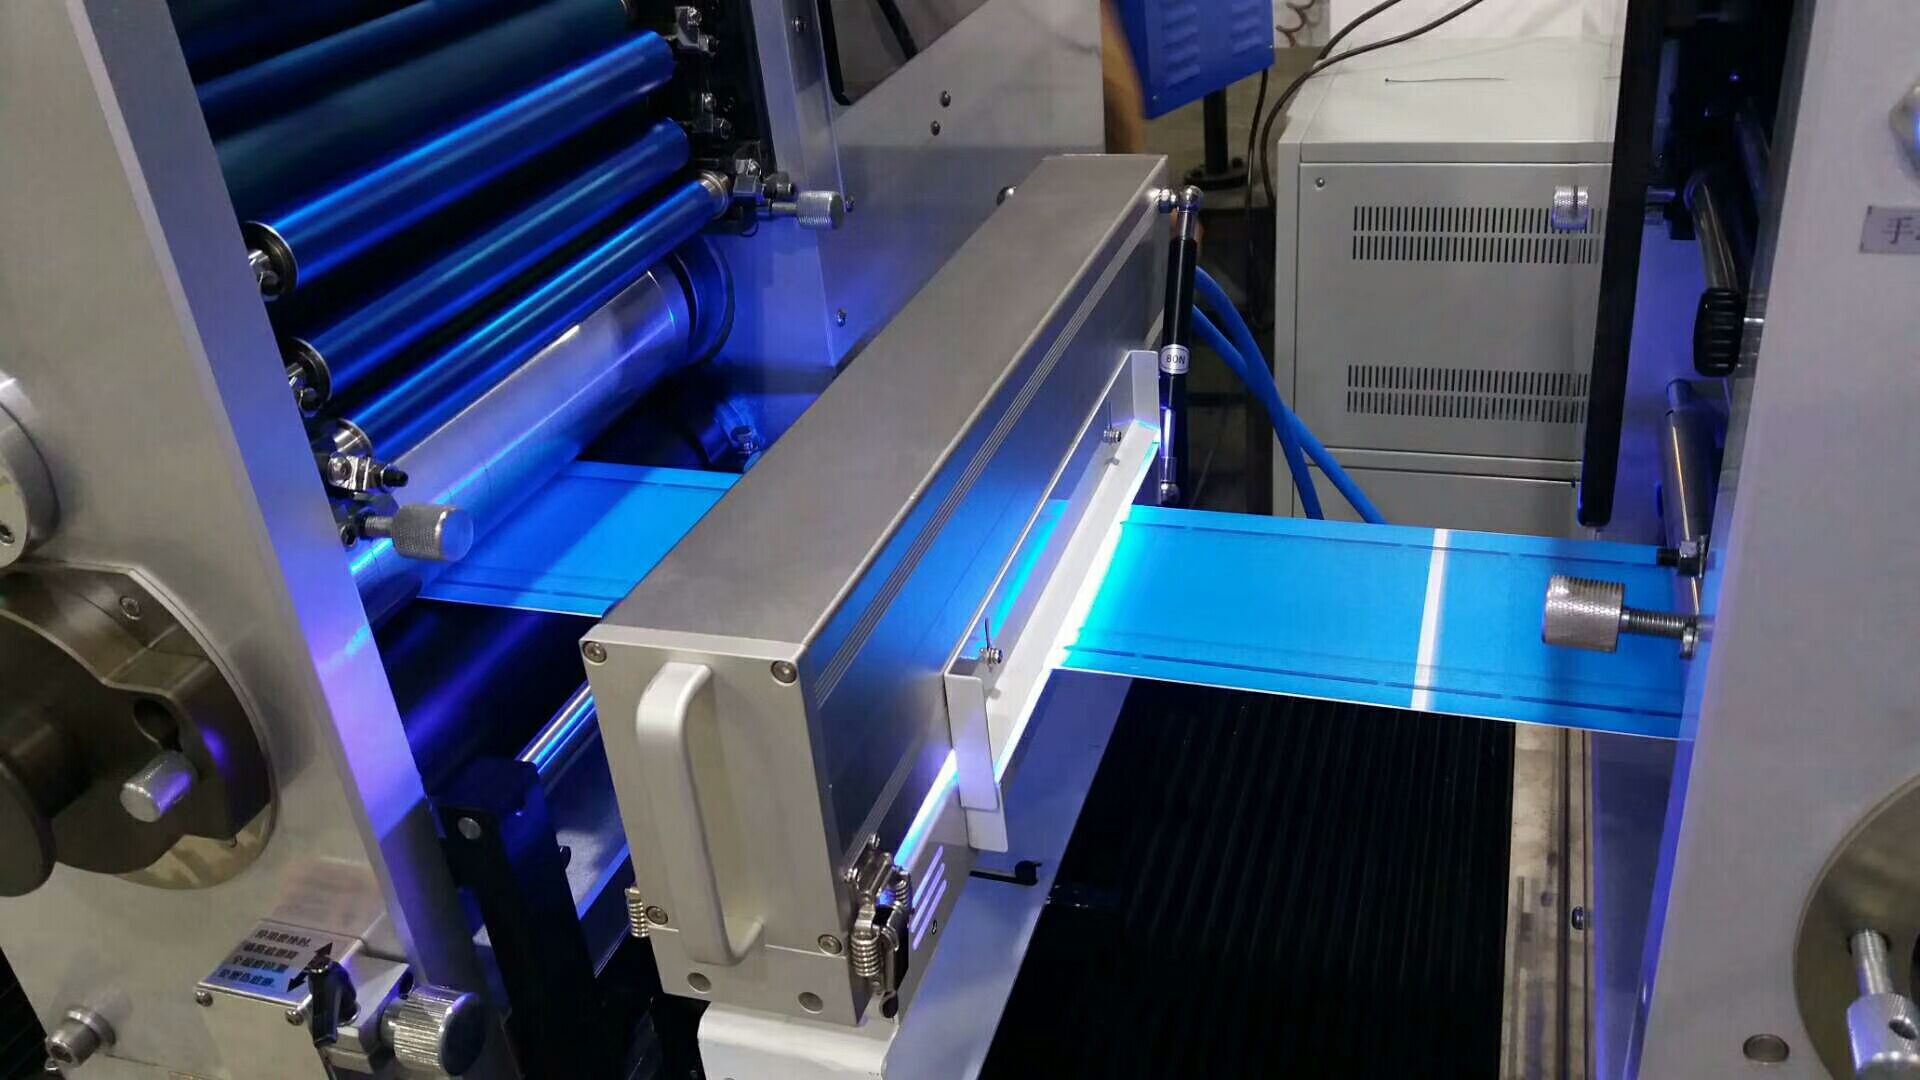 LED UV Curing Machine add in Large Scale Equipment